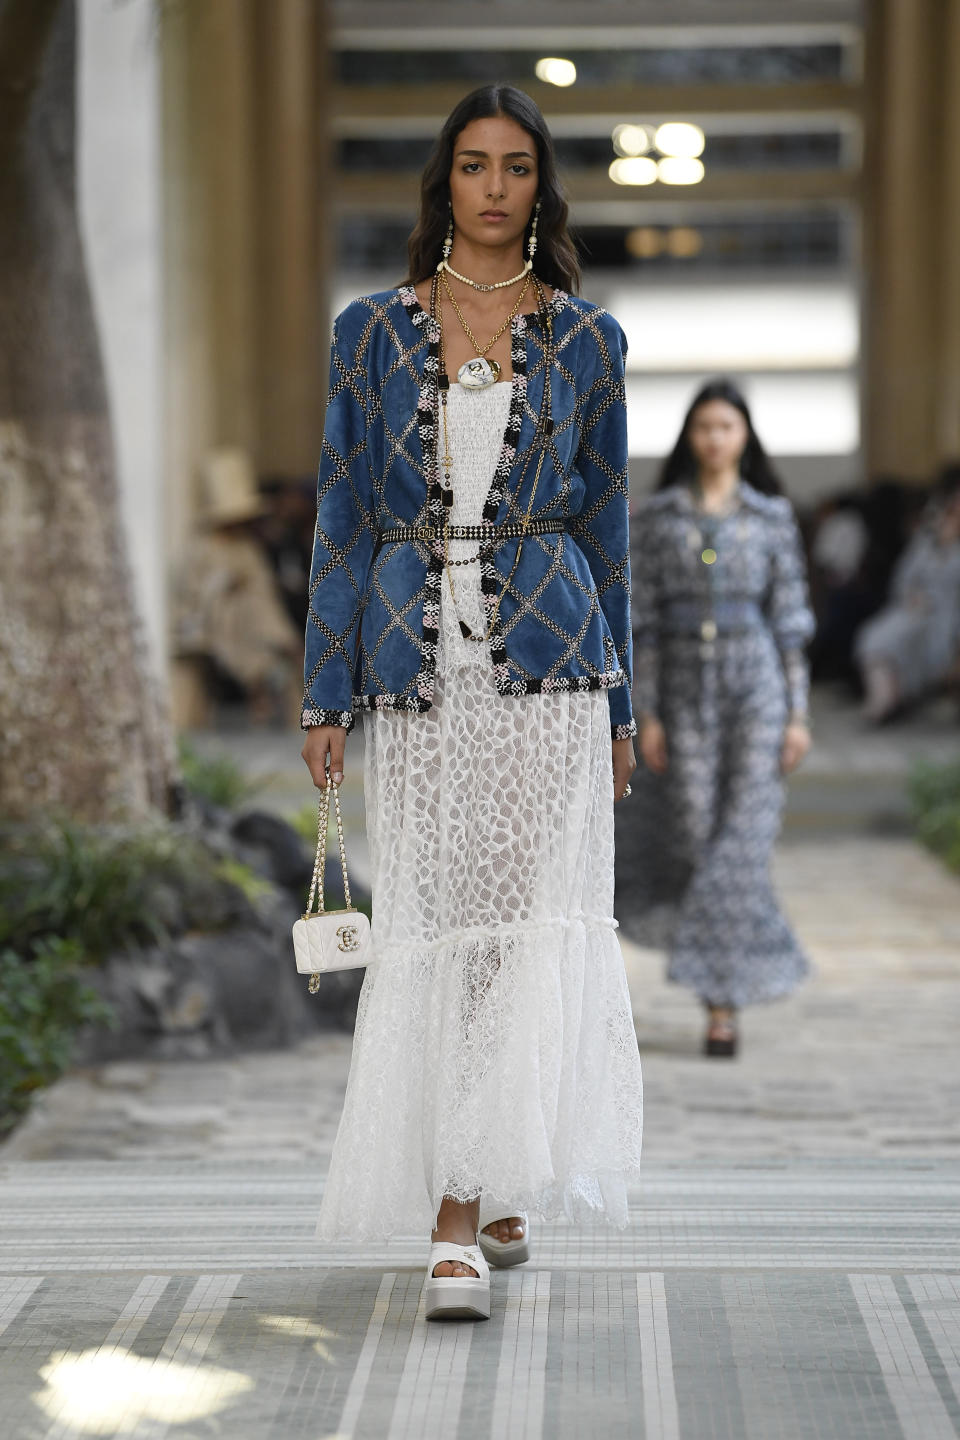 A look from the Chanel Métiers d'Art show